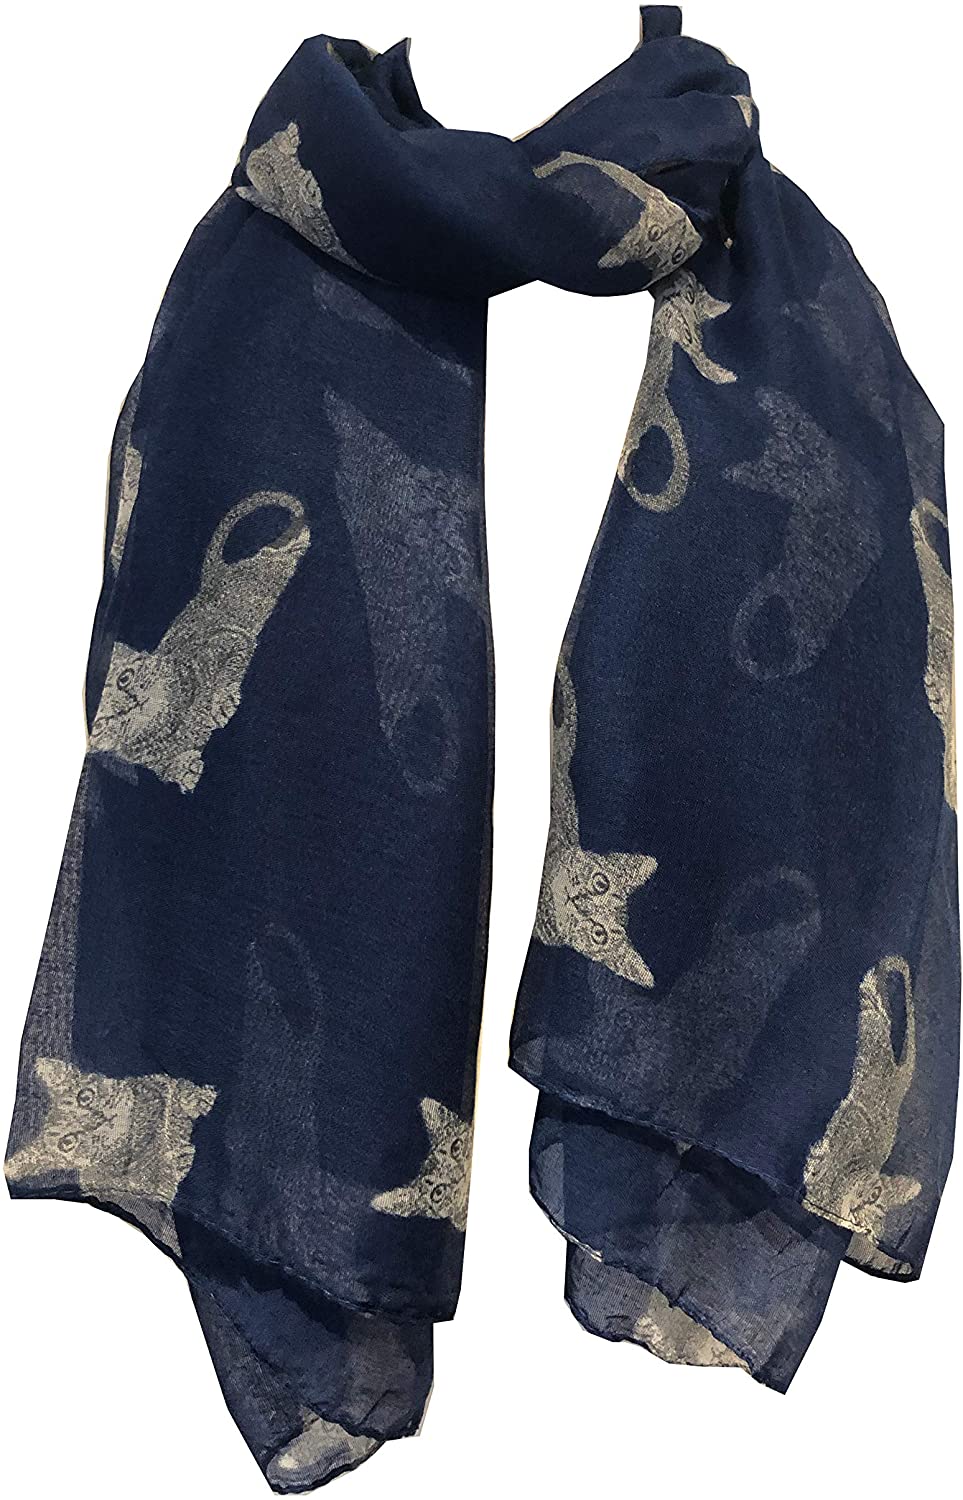 Pamper Yourself Now Blue with Grey Laying Down Cats Scarf Great Present for cat Lovers.